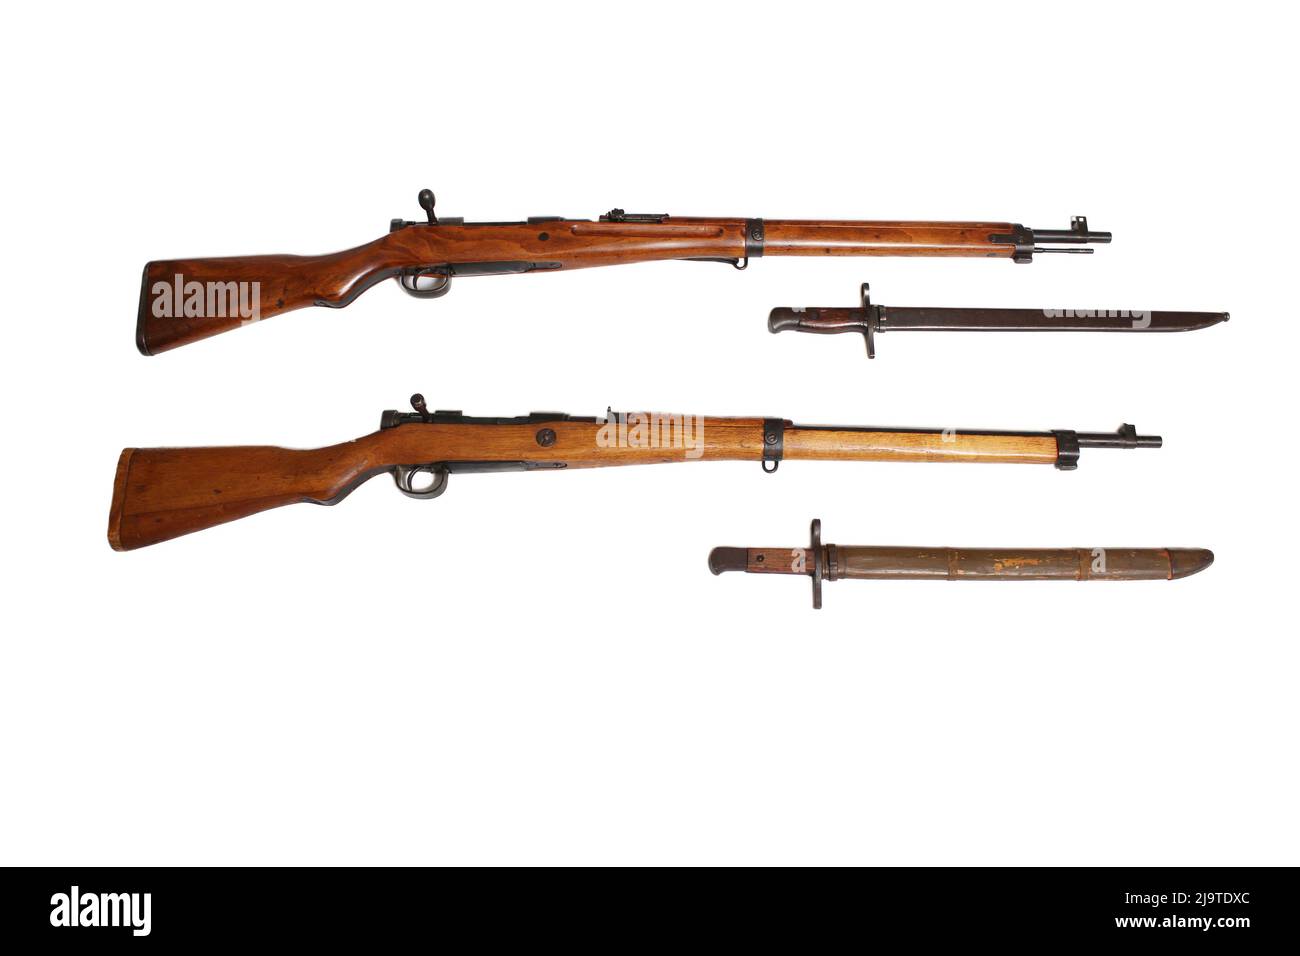 Two Versions on Japanese Arisaka Rifle of WW2. Top is early model and bottom is late war last ditch model Stock Photo